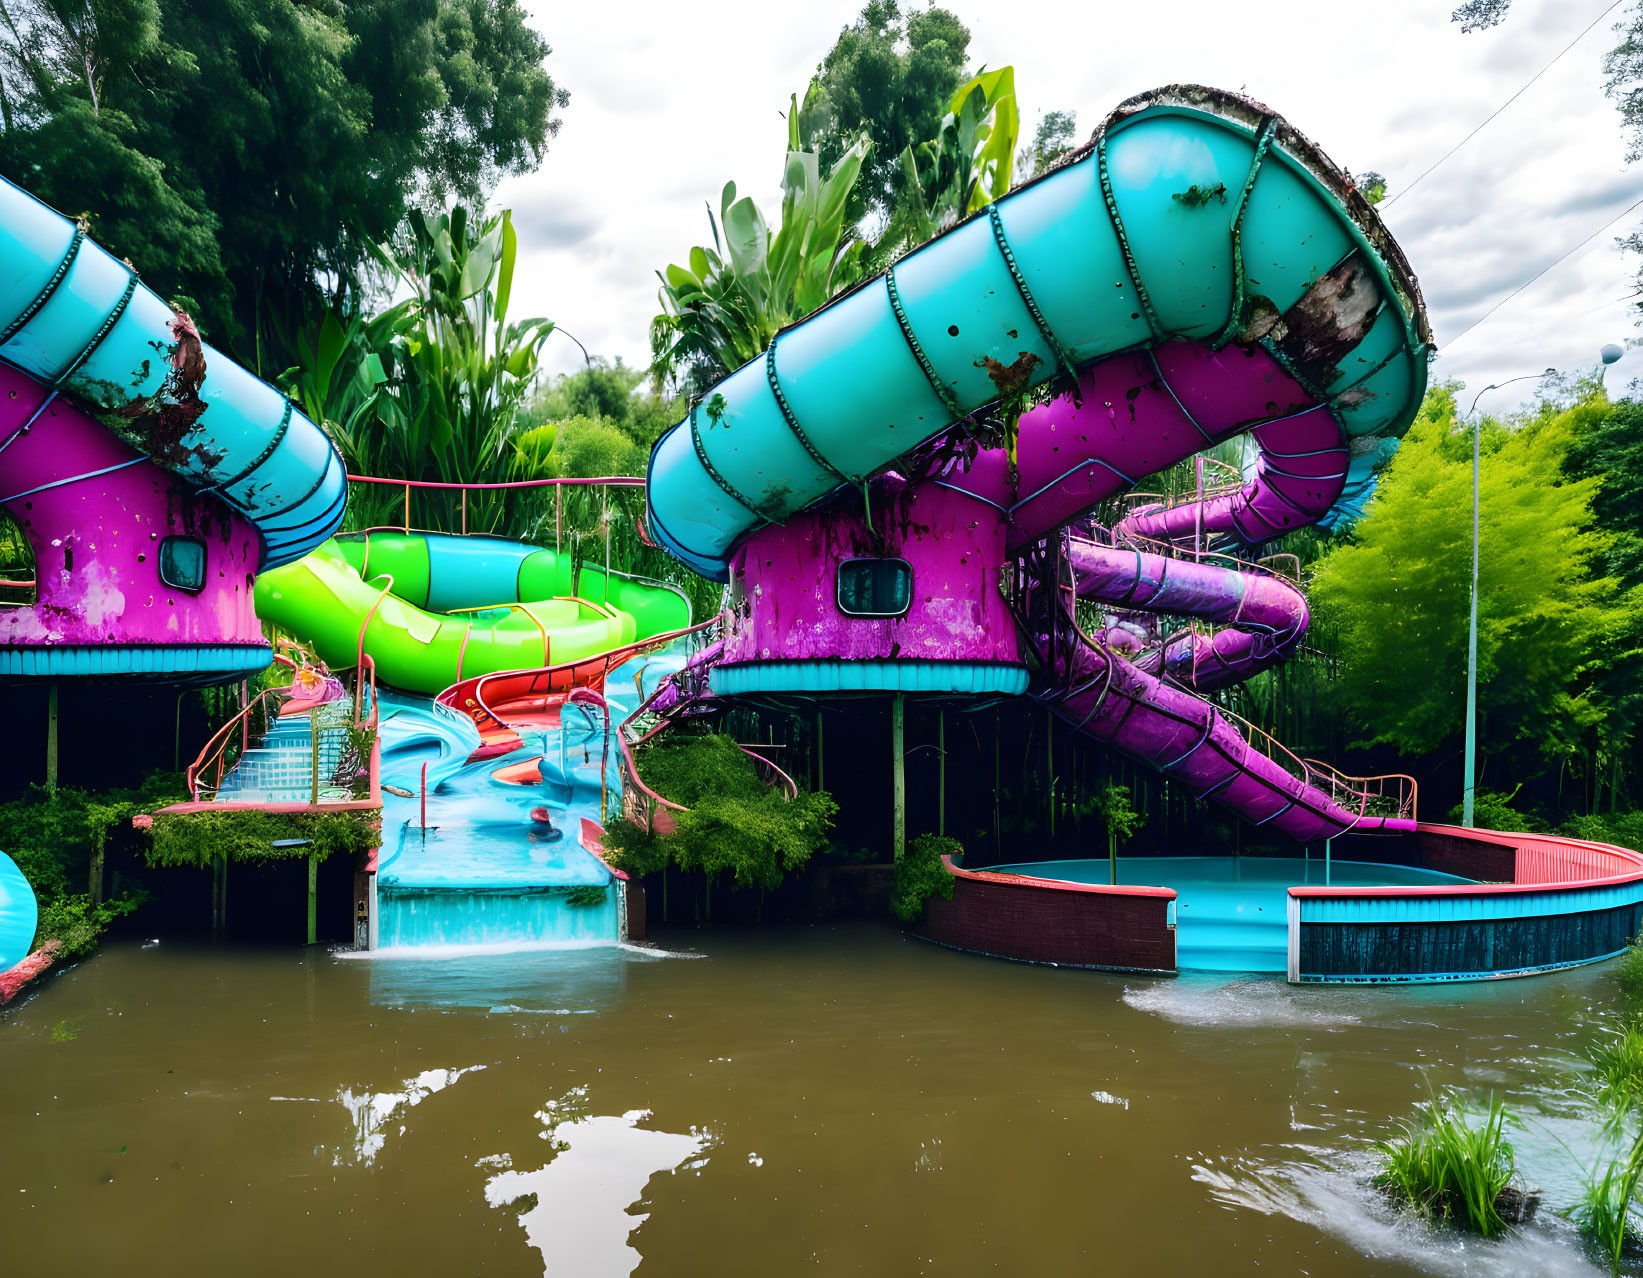 Abandoned water slides reclaimed by nature in murky surroundings